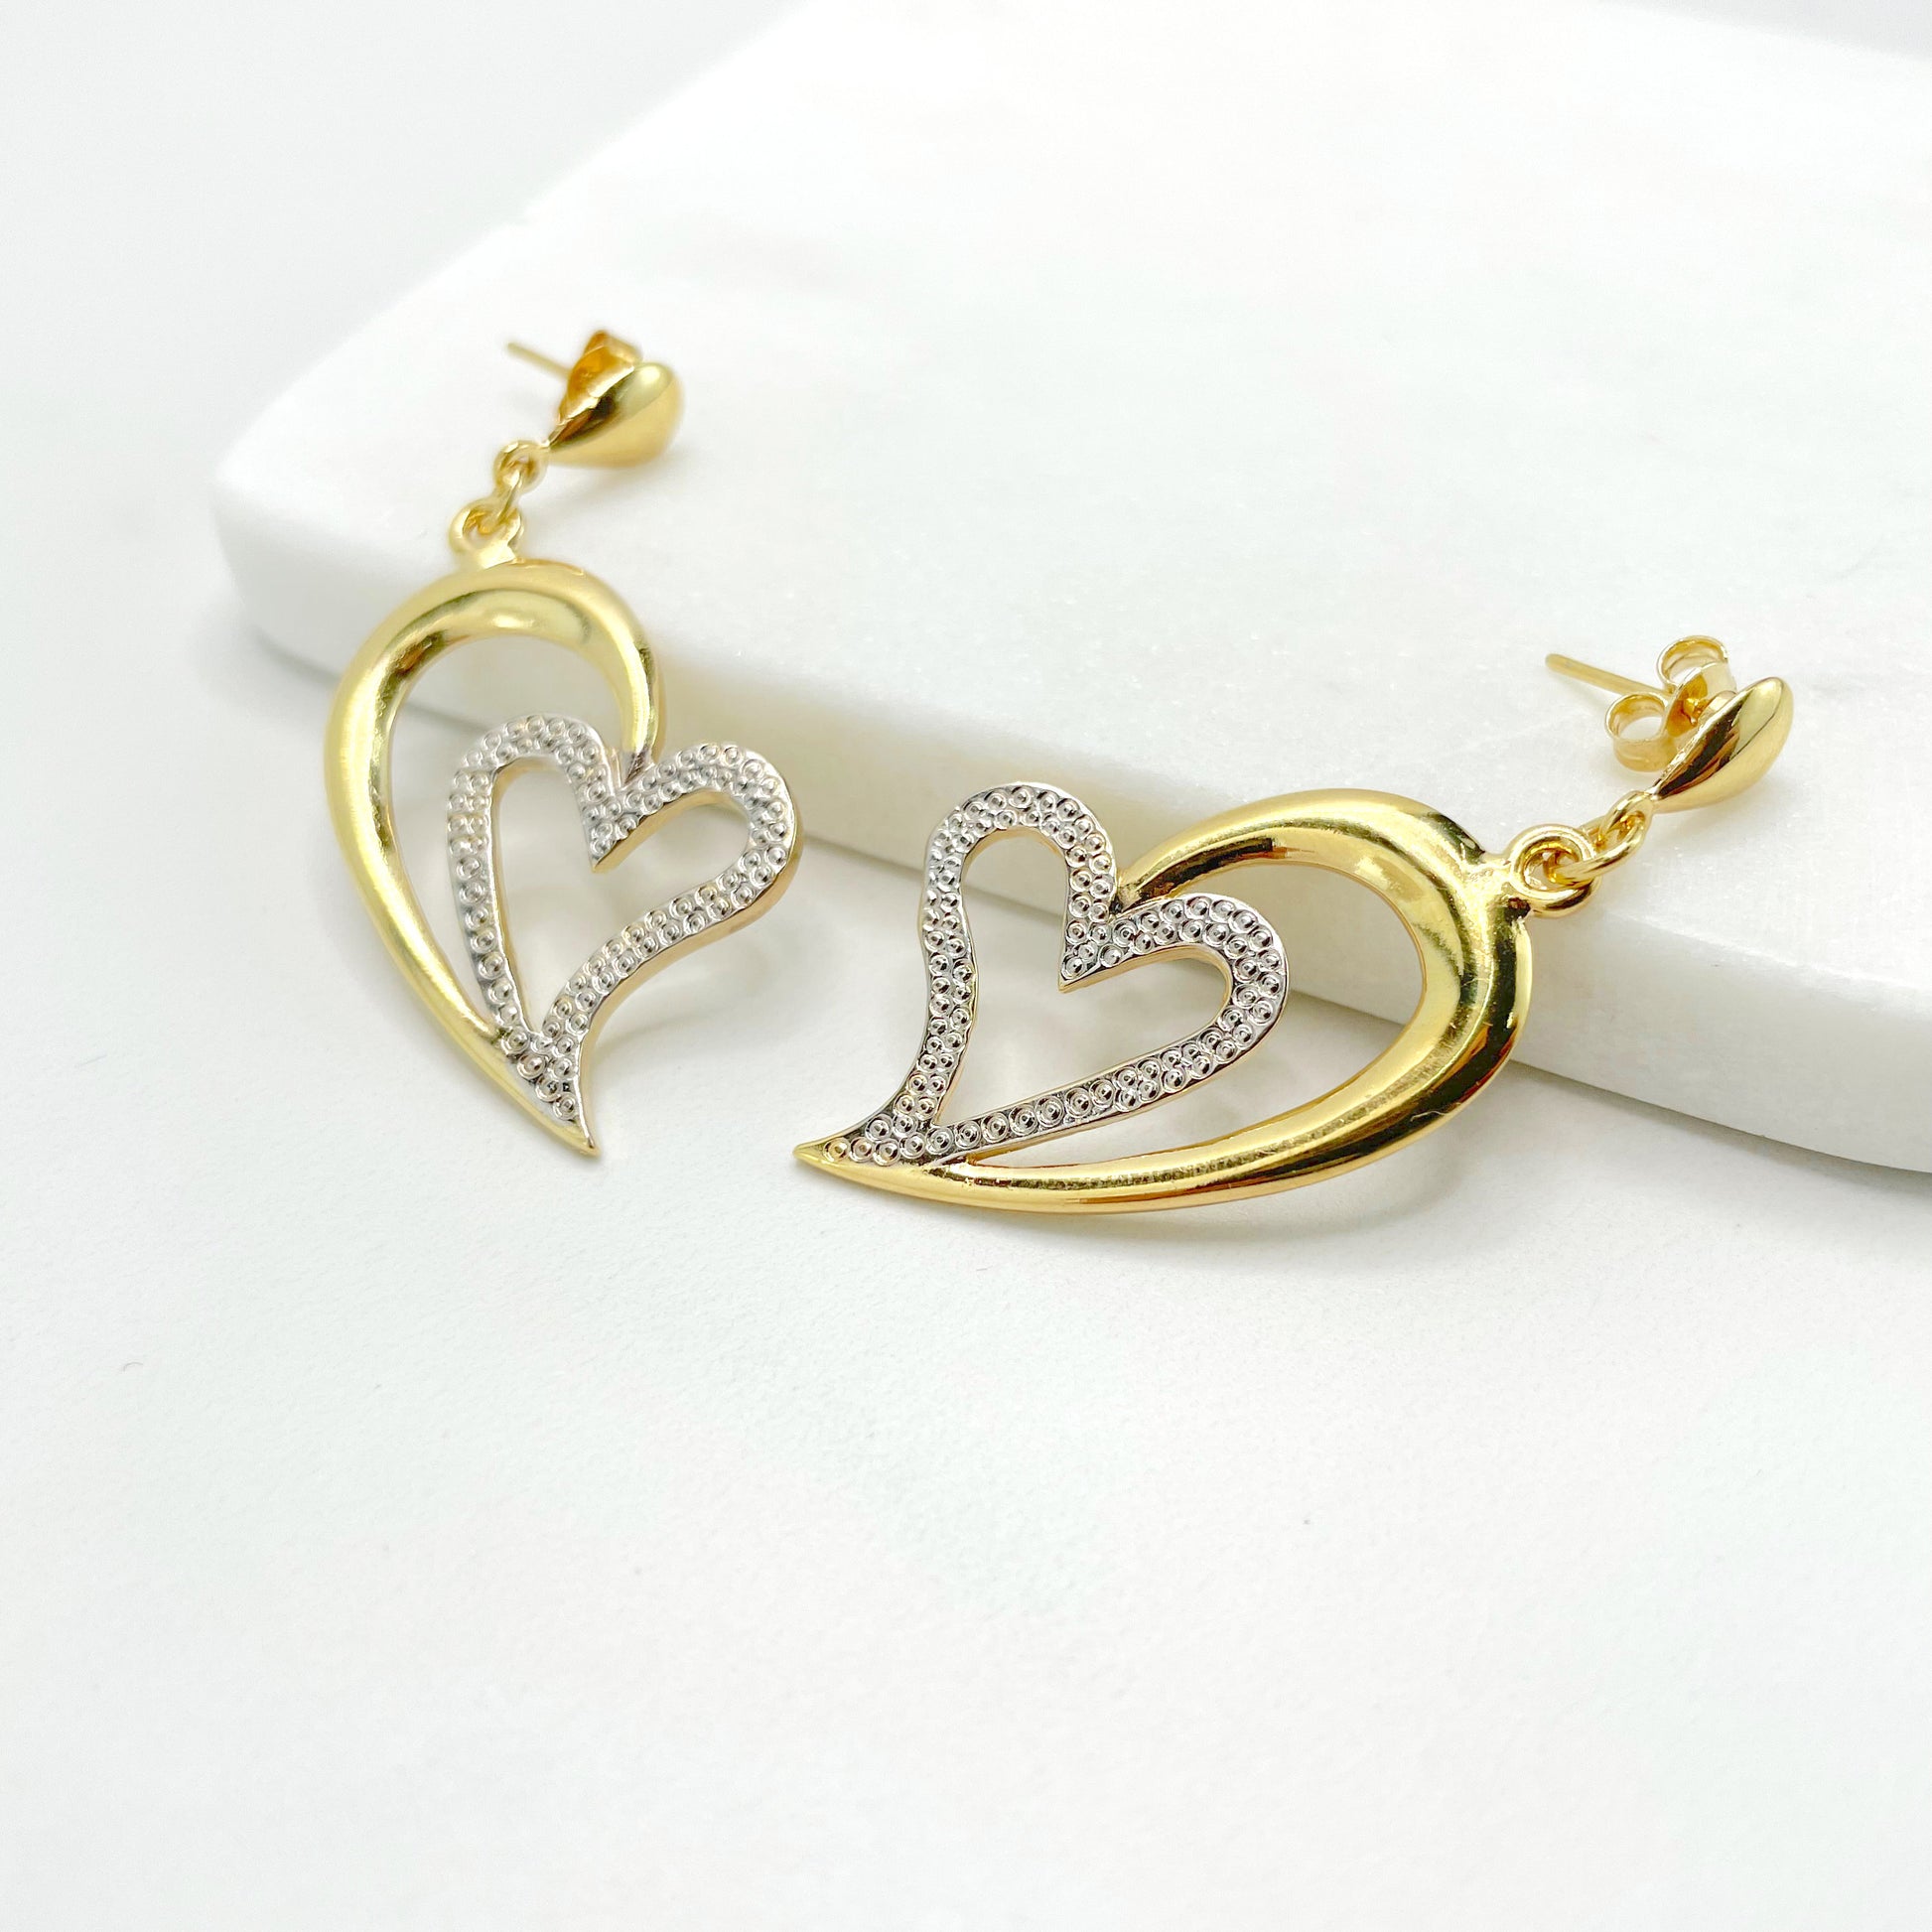 18k Gold Filled Two Tone Double Hearts Shape Design, Plain and Texturized, Drop Dangle Earrings, Wholesale Jewelry Making Supplies